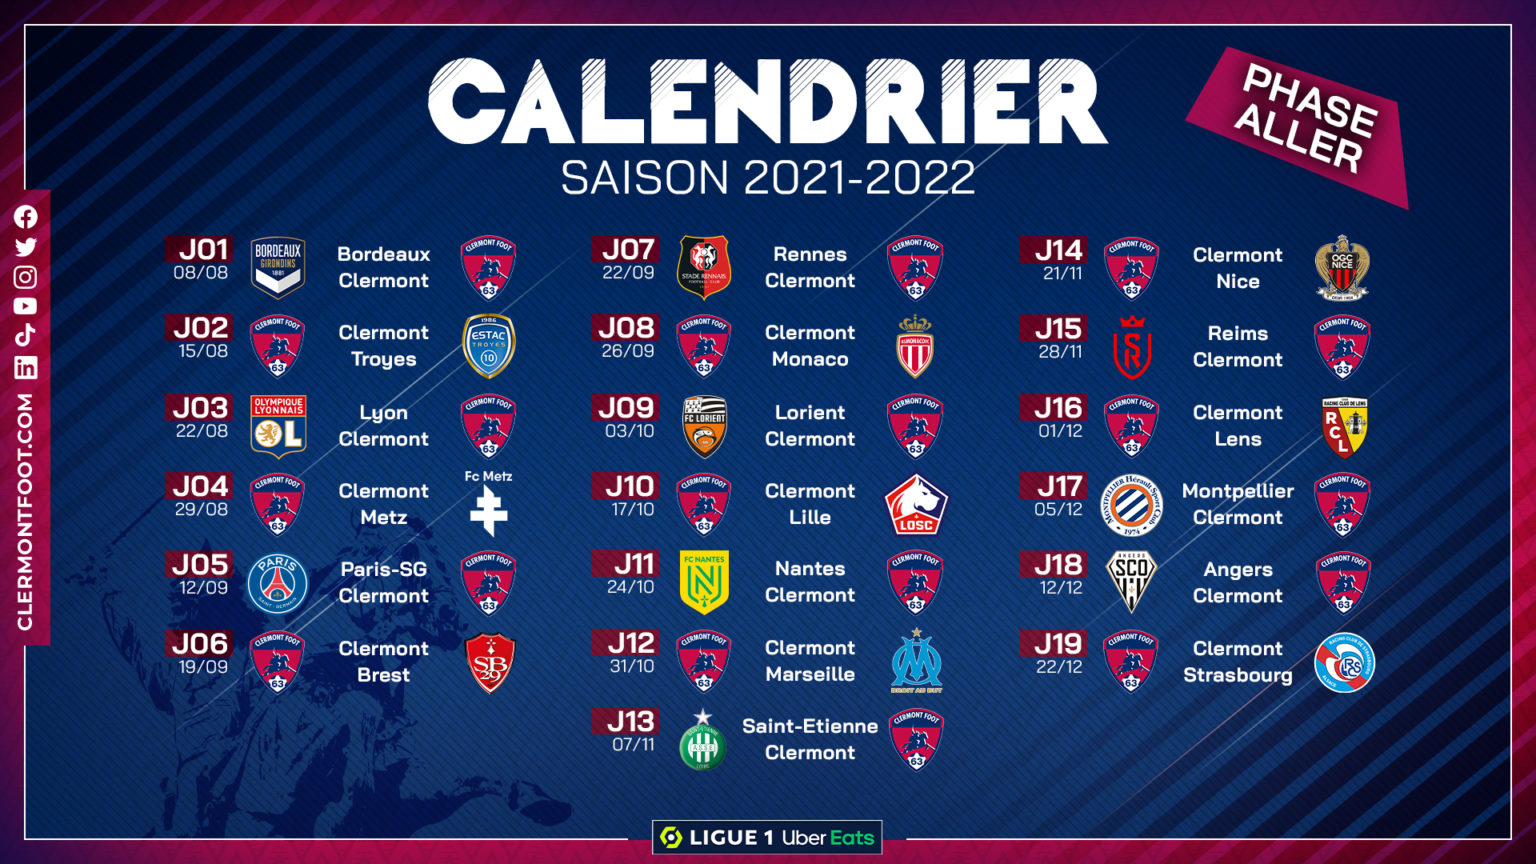 Clermont Foot : calendrier Ligue 1, 2021/2022 Calendrier-CF63_1-1-1536x864